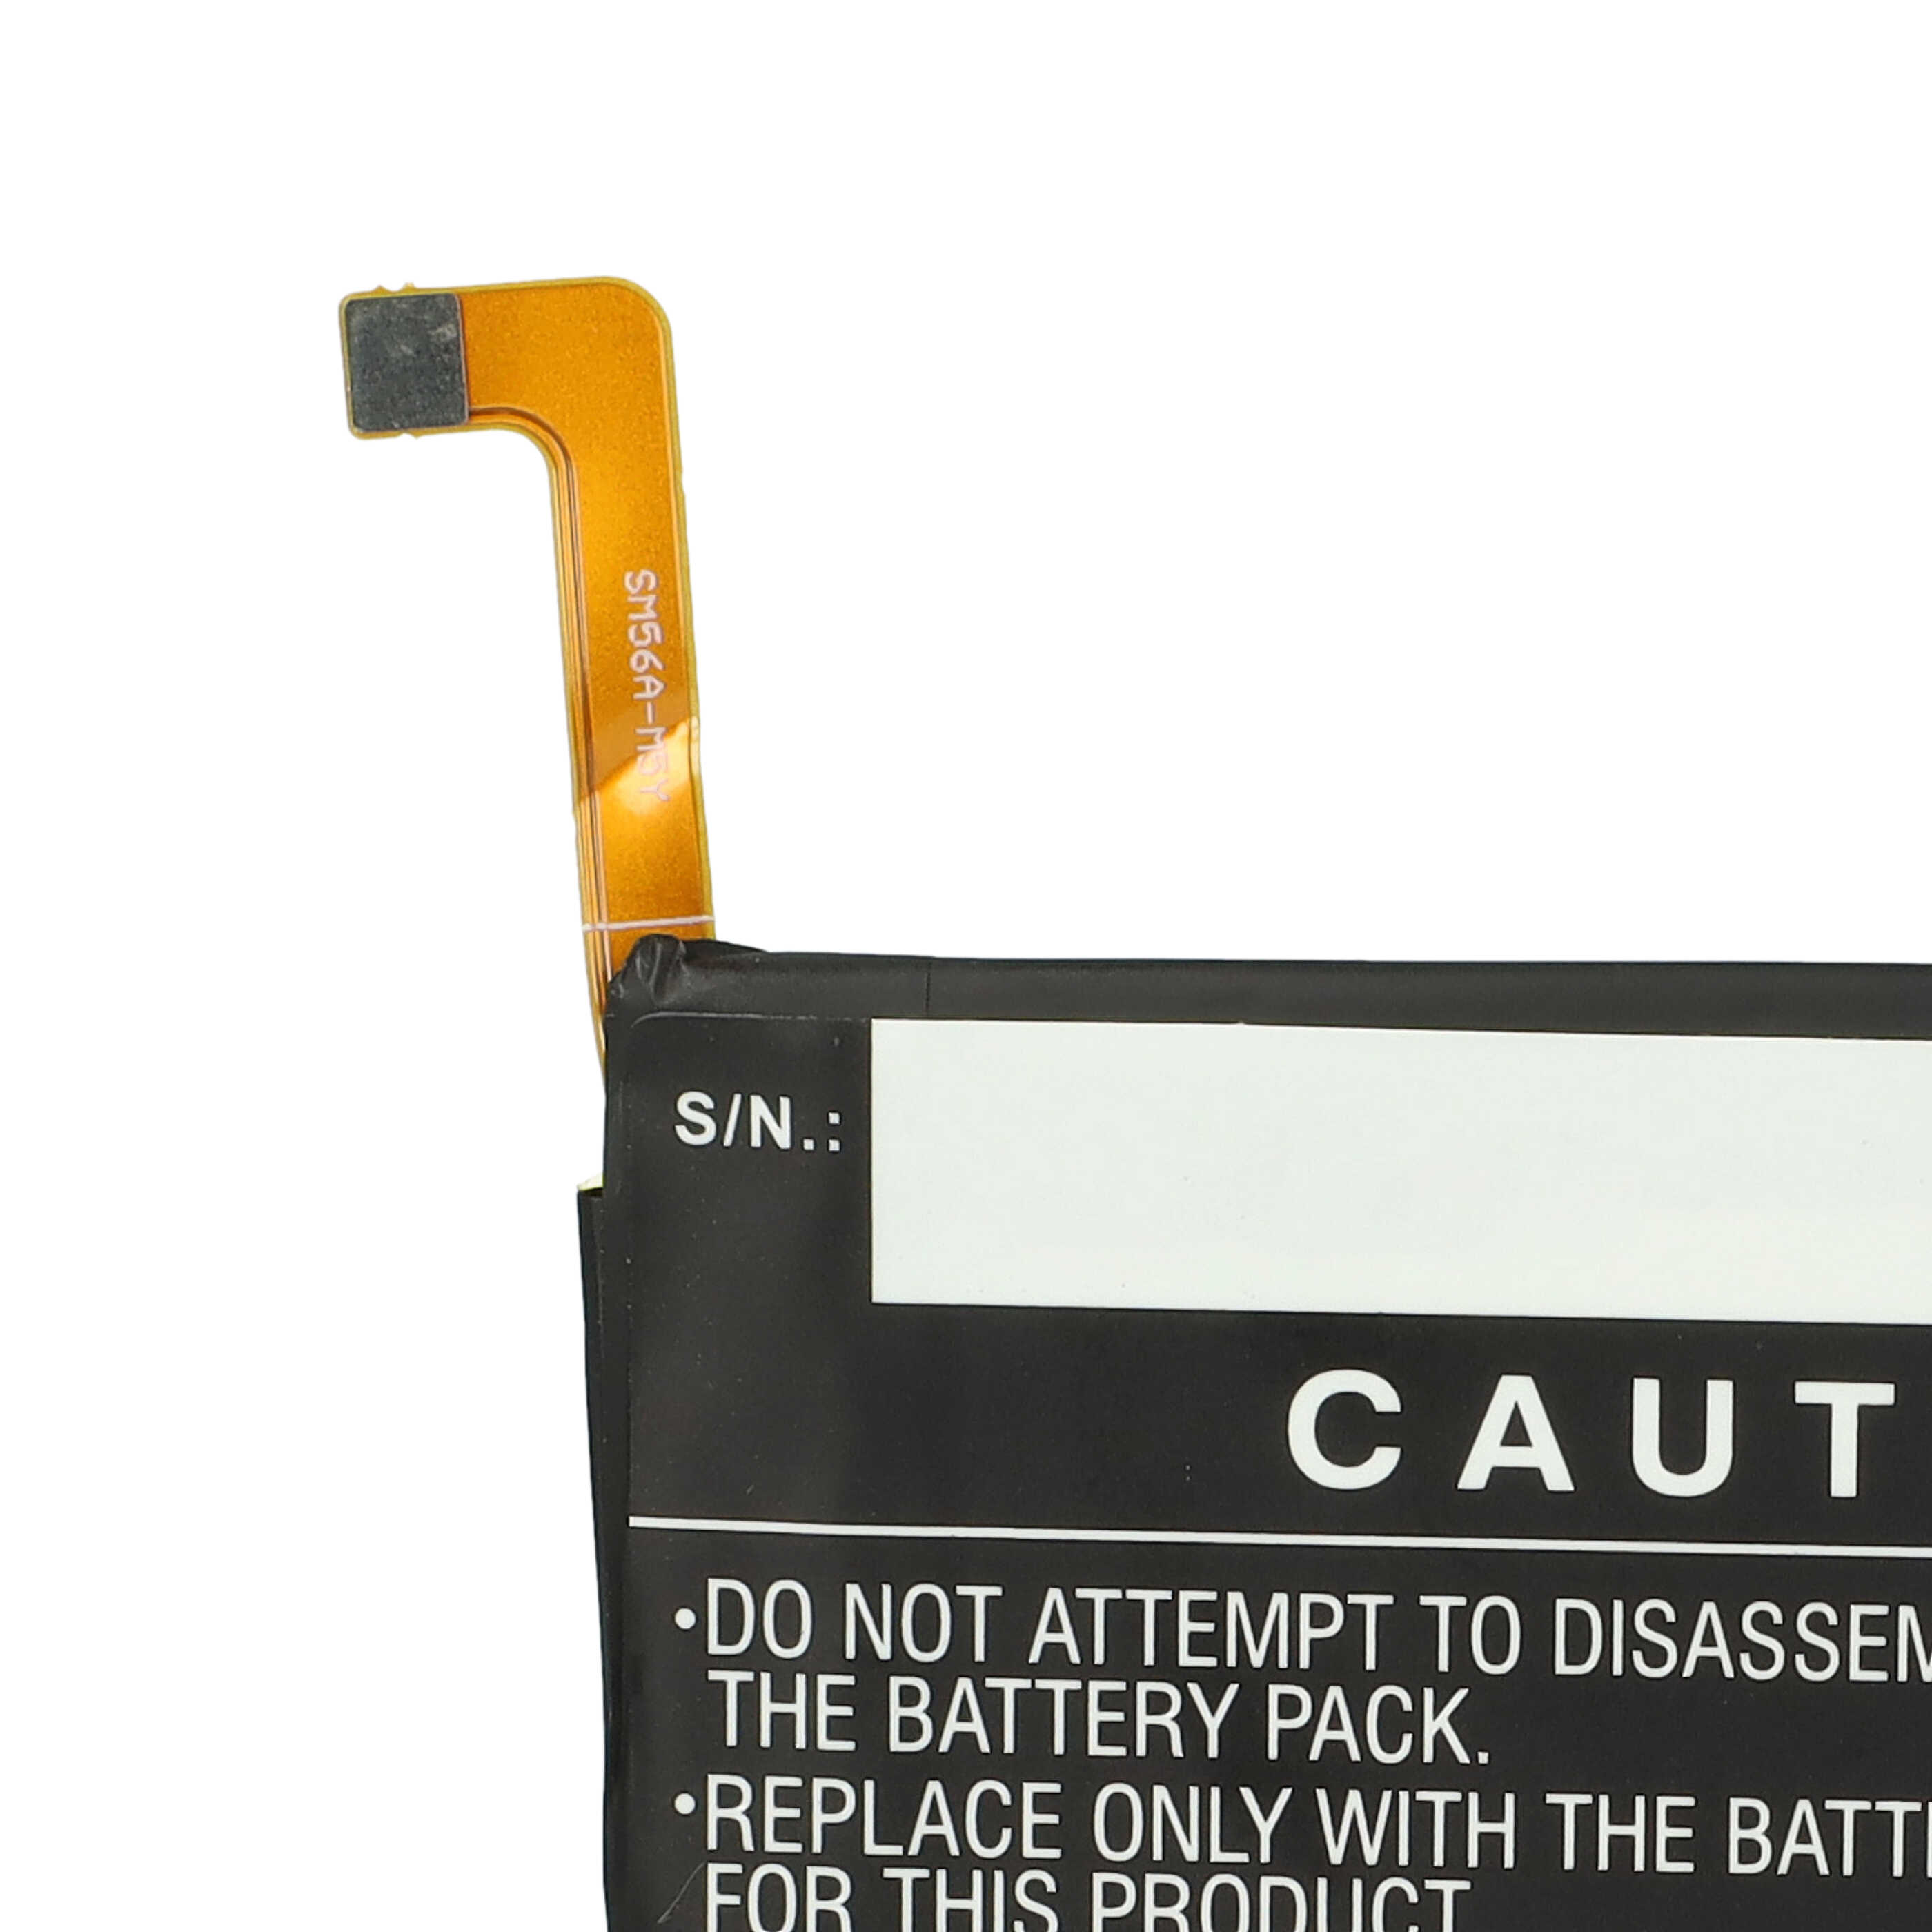 Mobile Phone Battery Replacement for Samsung EB-BS906ABY, GH82-27502A - 4000mAh 3.88V Li-polymer